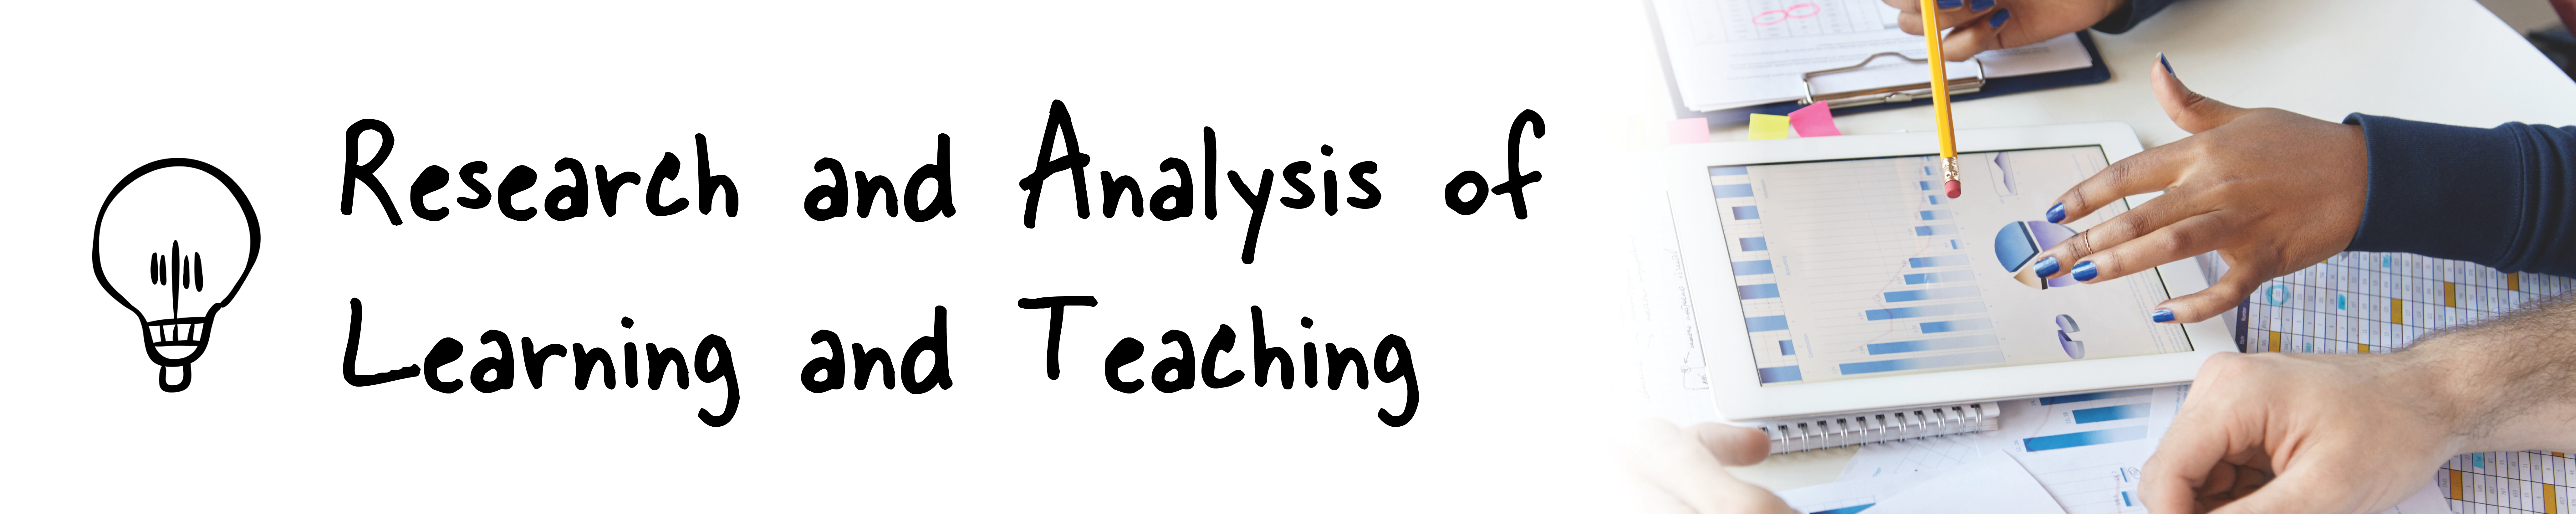 Research and Analysis of Learning Teaching